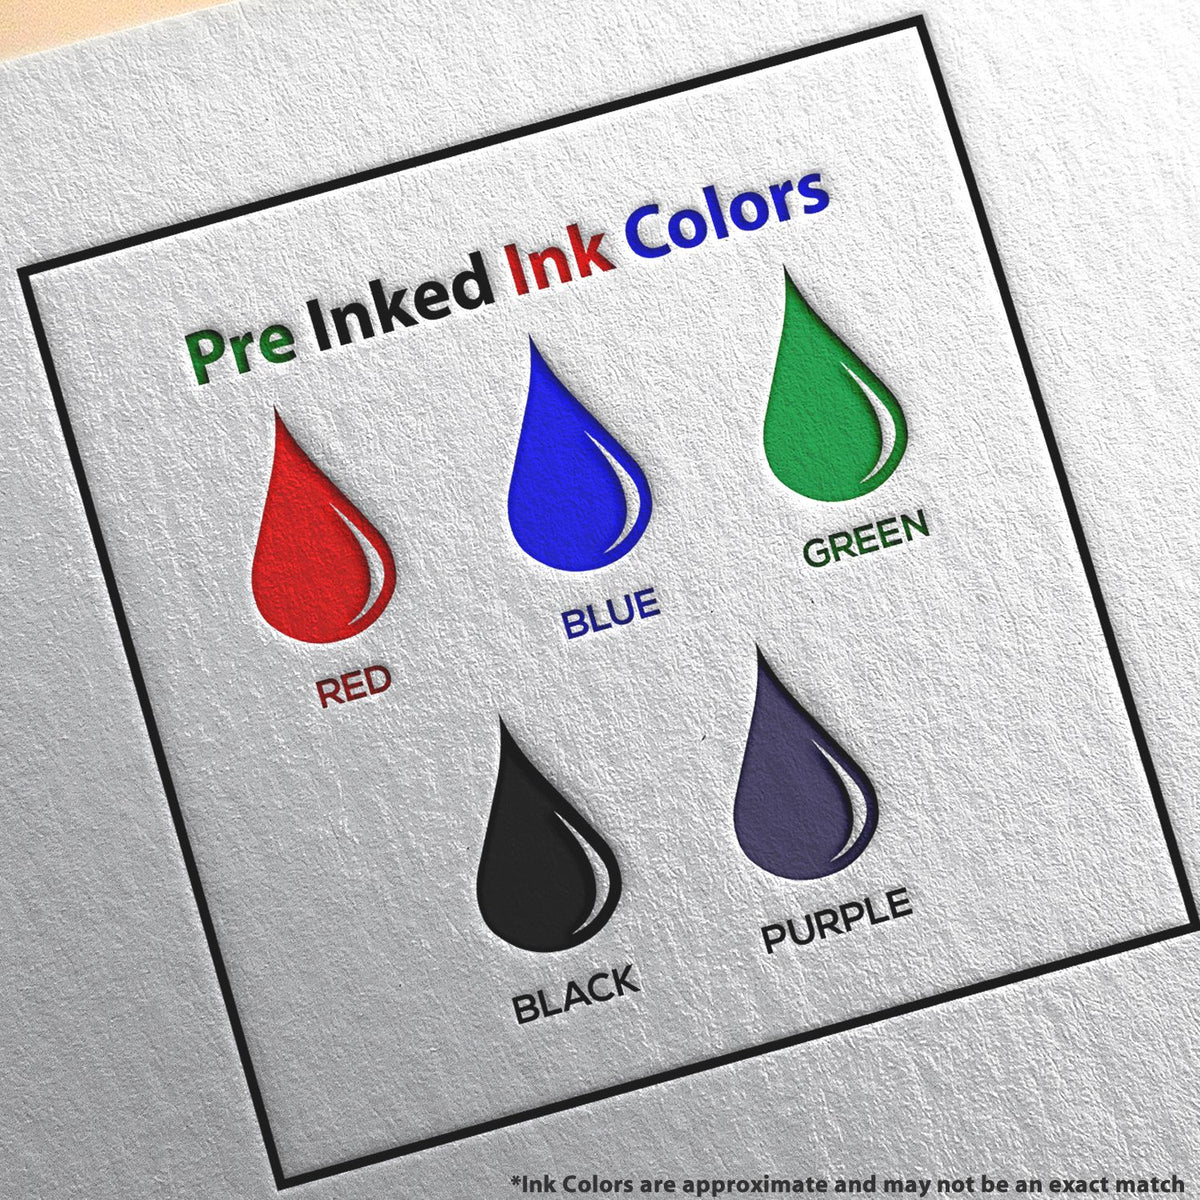 A picture showing the different ink colors or hues available for the Slim Pre-Inked Louisiana Architect Seal Stamp product.